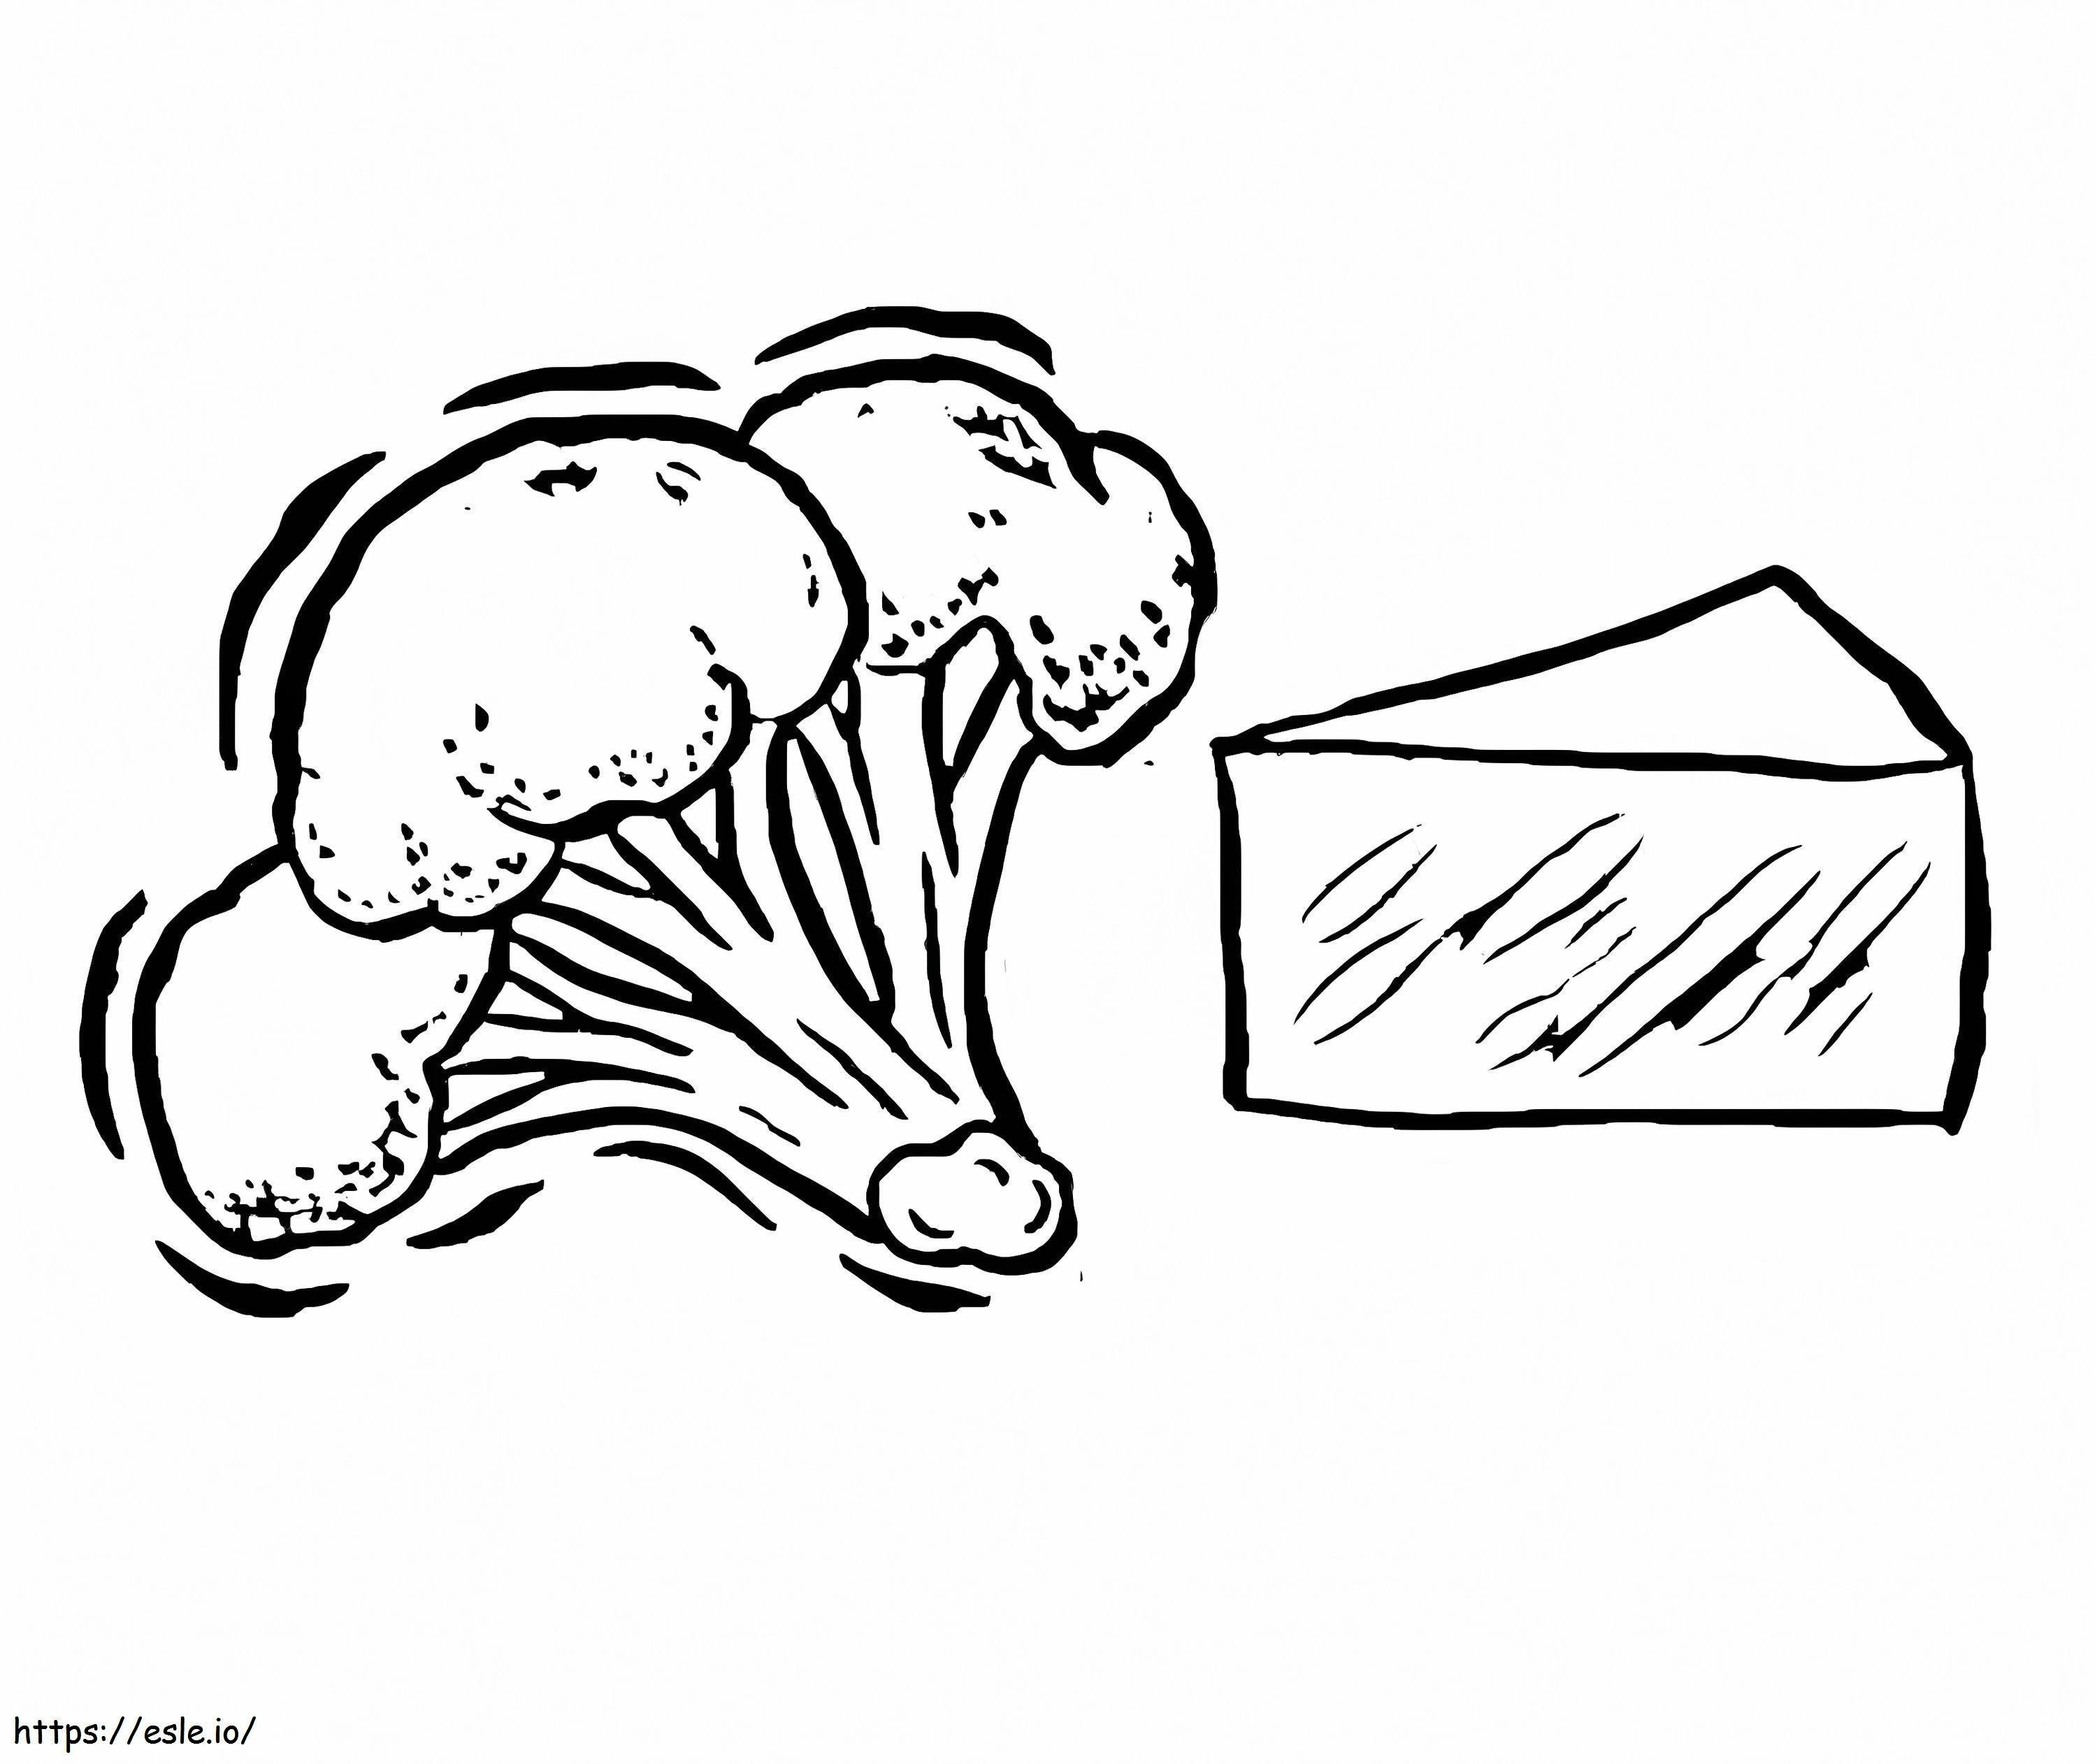 Broccoli And Cheese coloring page